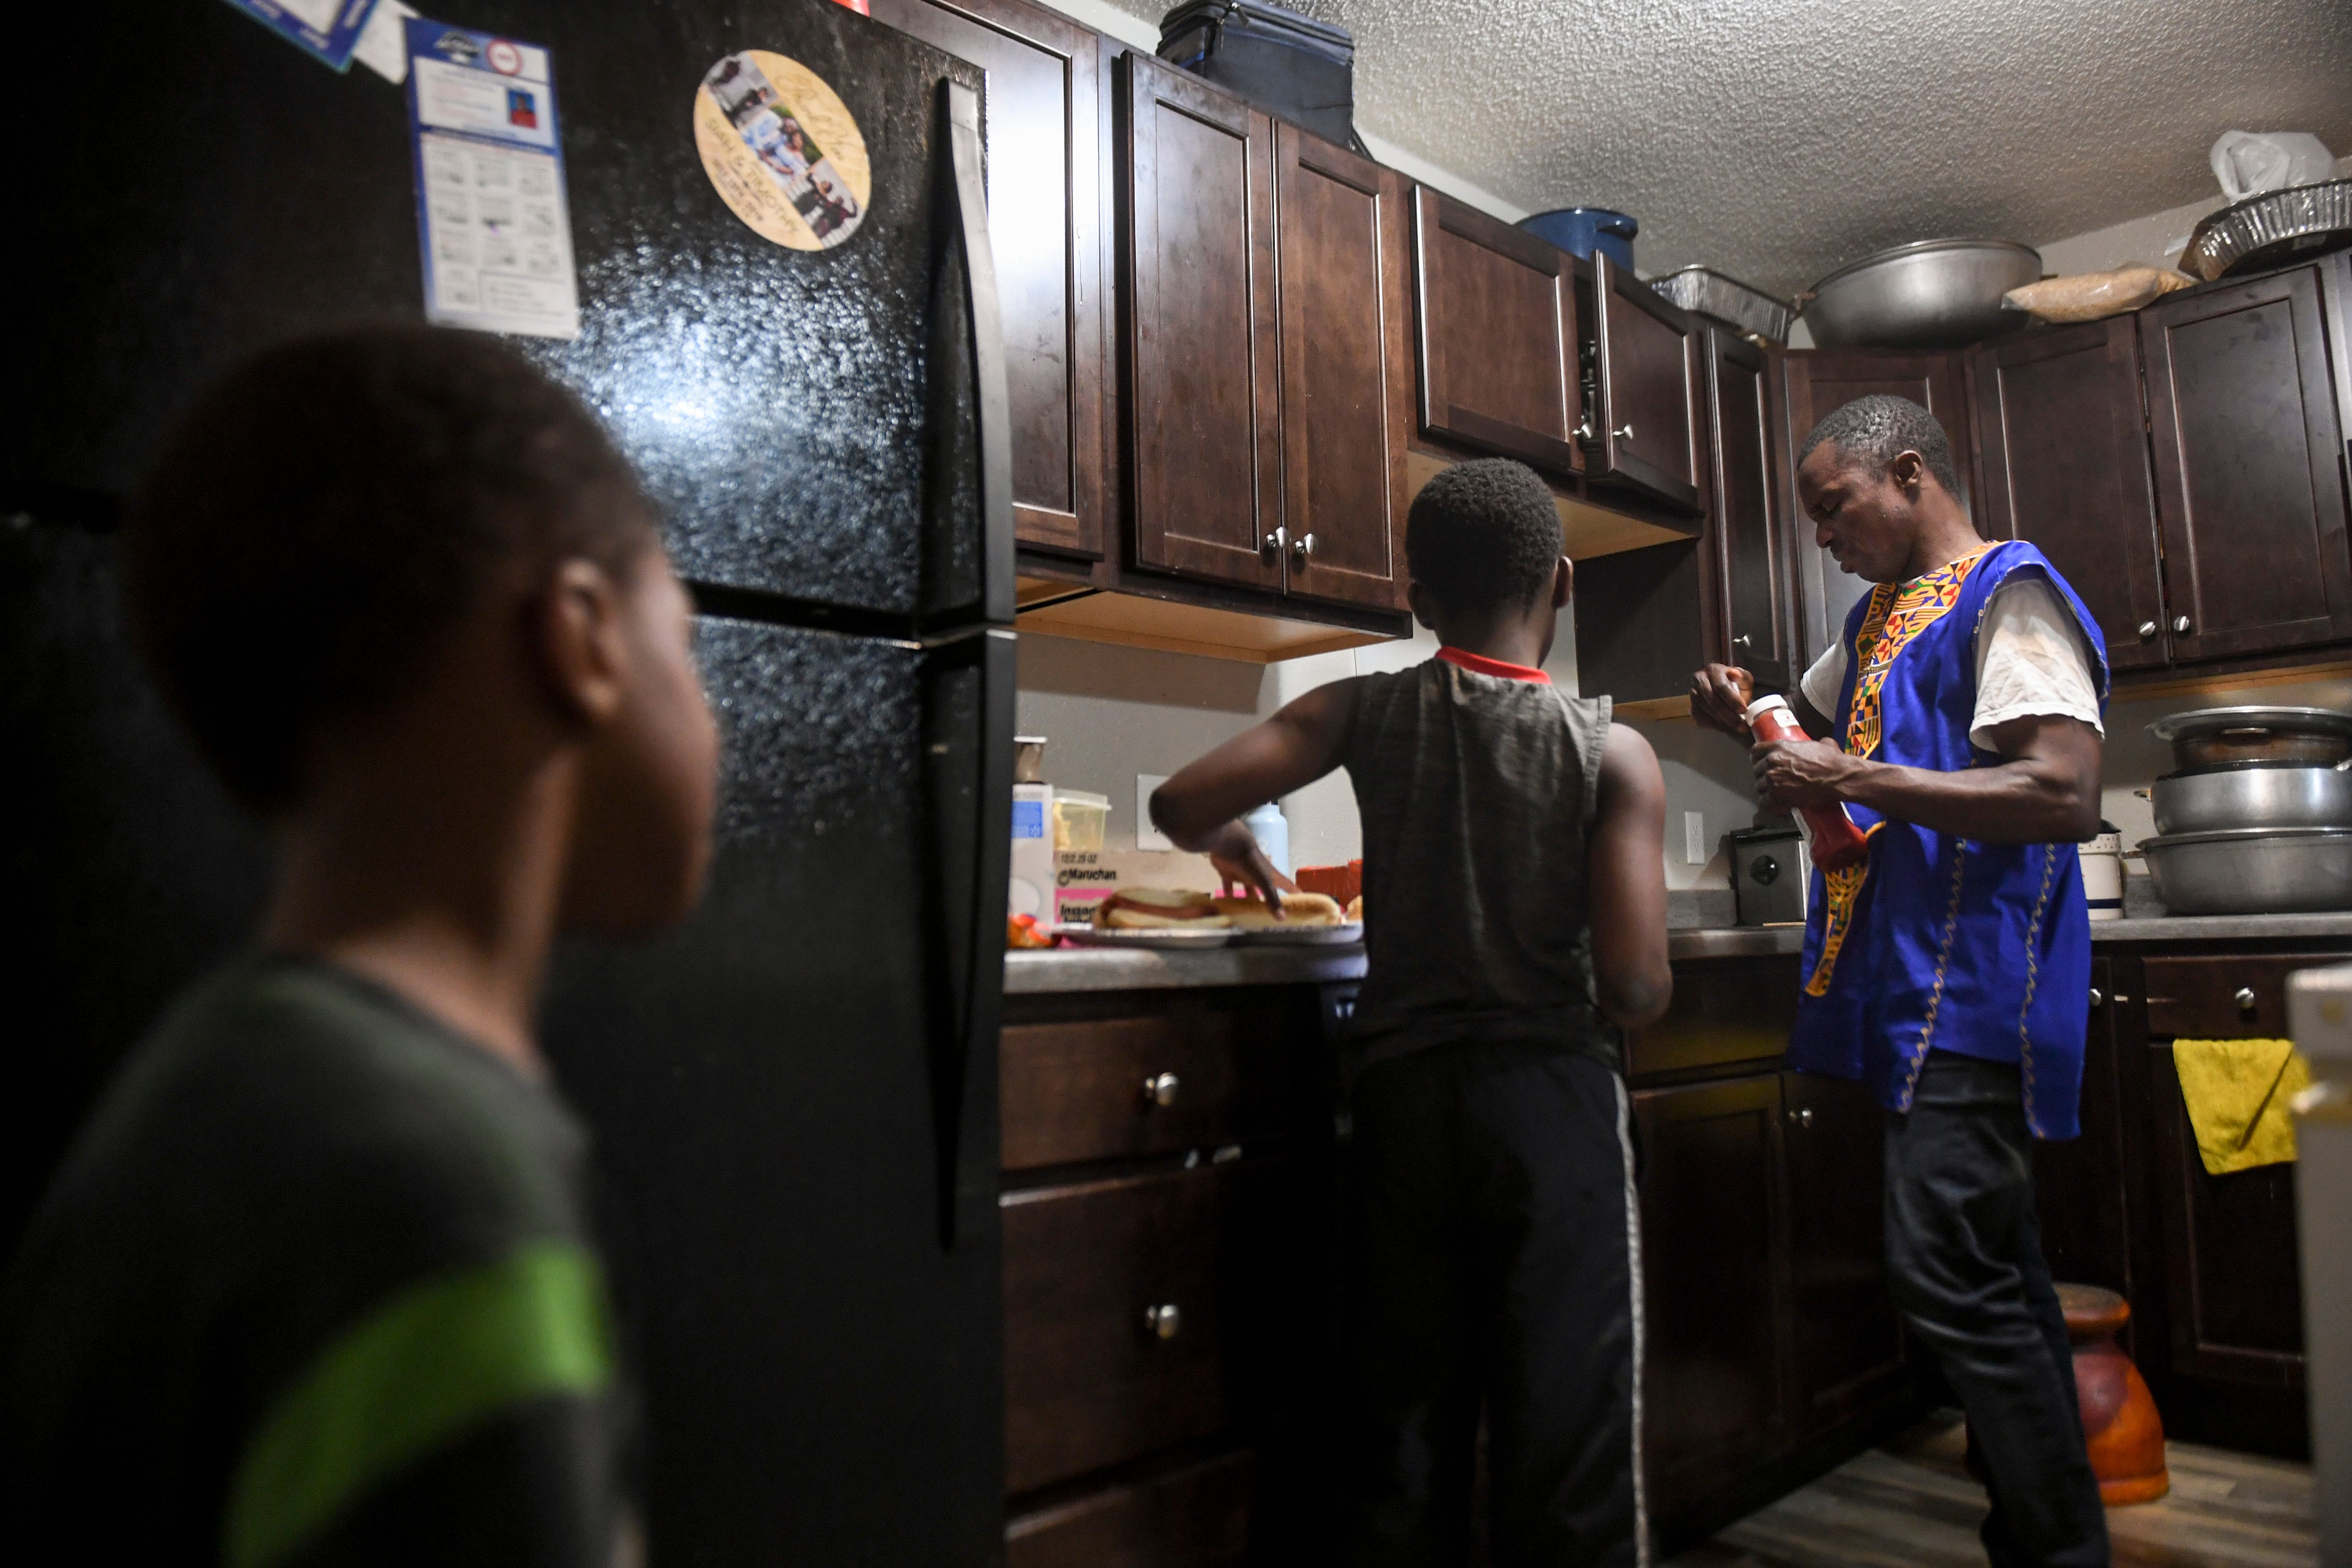 John Deranamie cooks dinner for his sons, Shadrach Cole, 4, and Joel Cole, 9, on Wednesday, April 29, 2020, at his home in Sioux Falls, S.D.